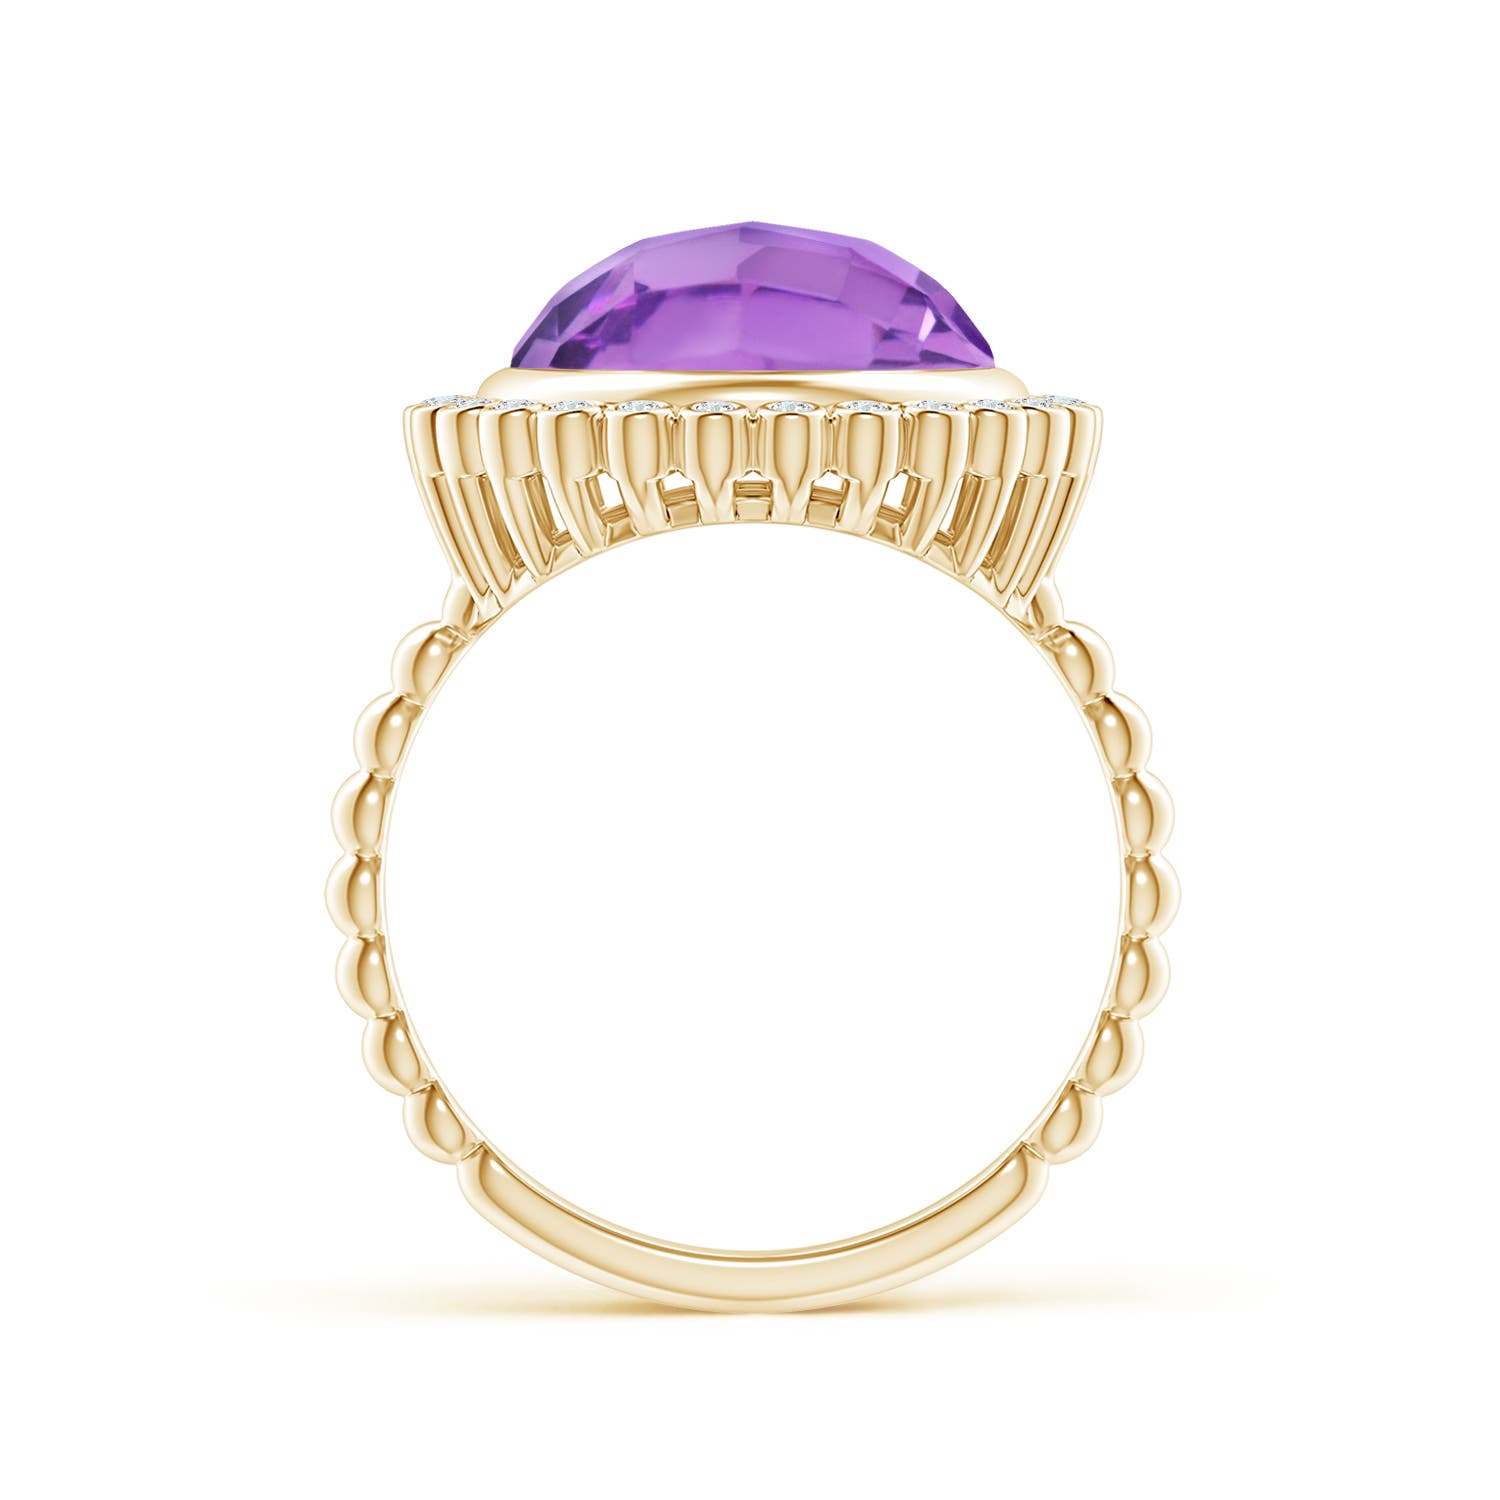 A - Amethyst / 5.01 CT / 14 KT Yellow Gold